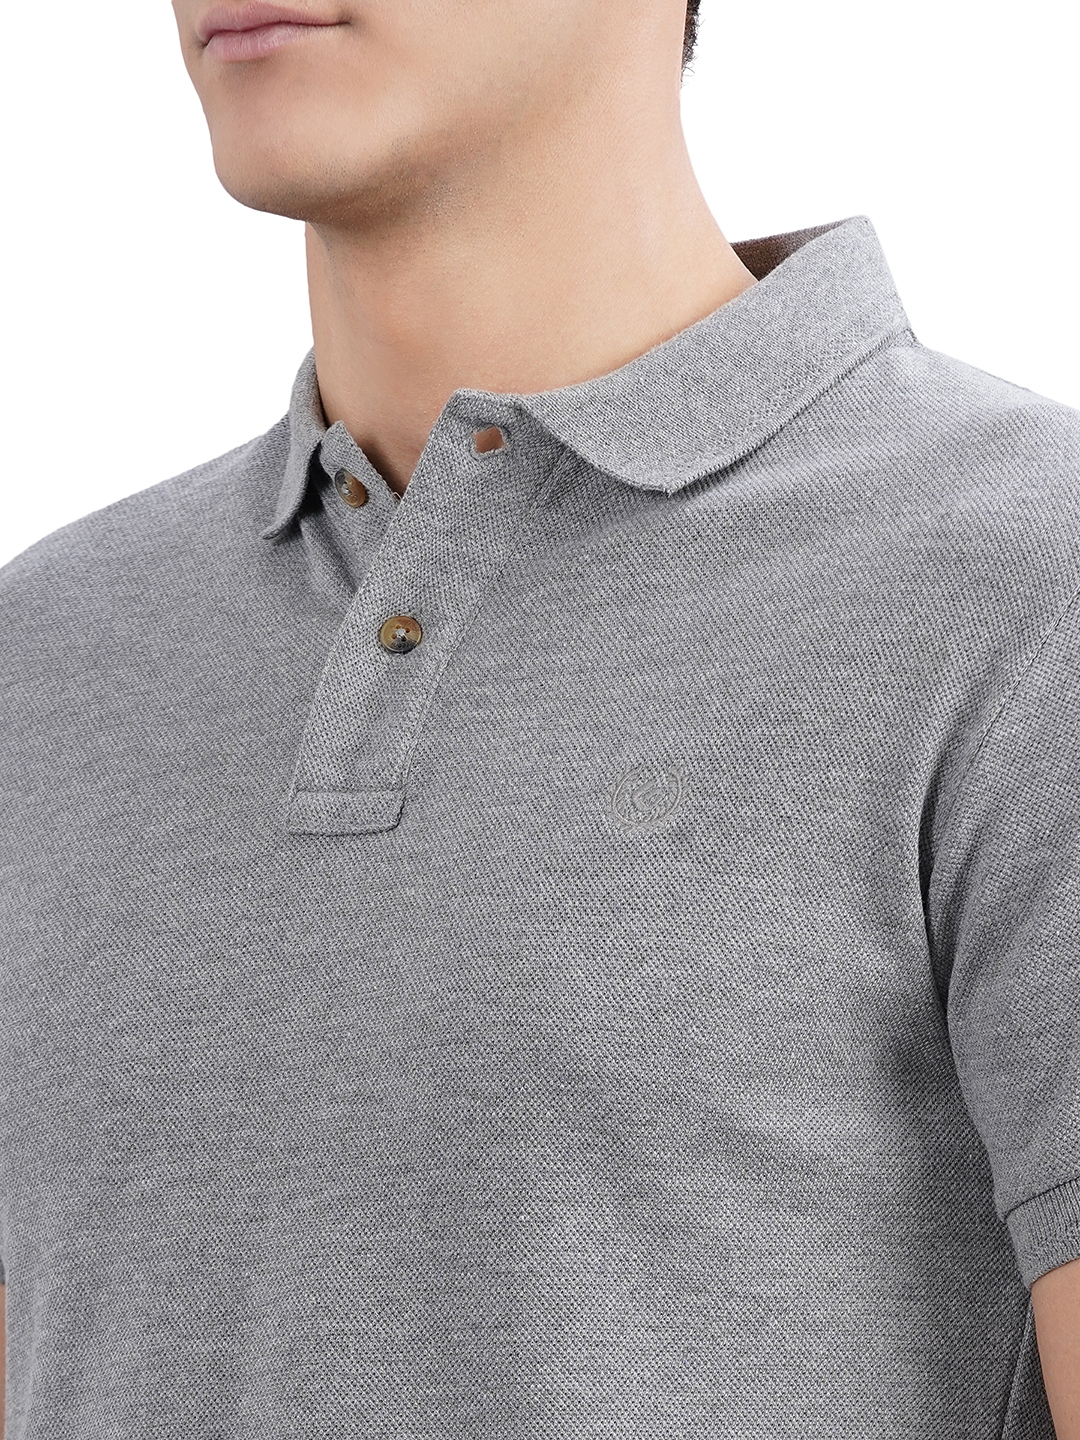 Greenfibre | Grey Solid Slim Fit Polo T-Shirt | Greenfibre 4